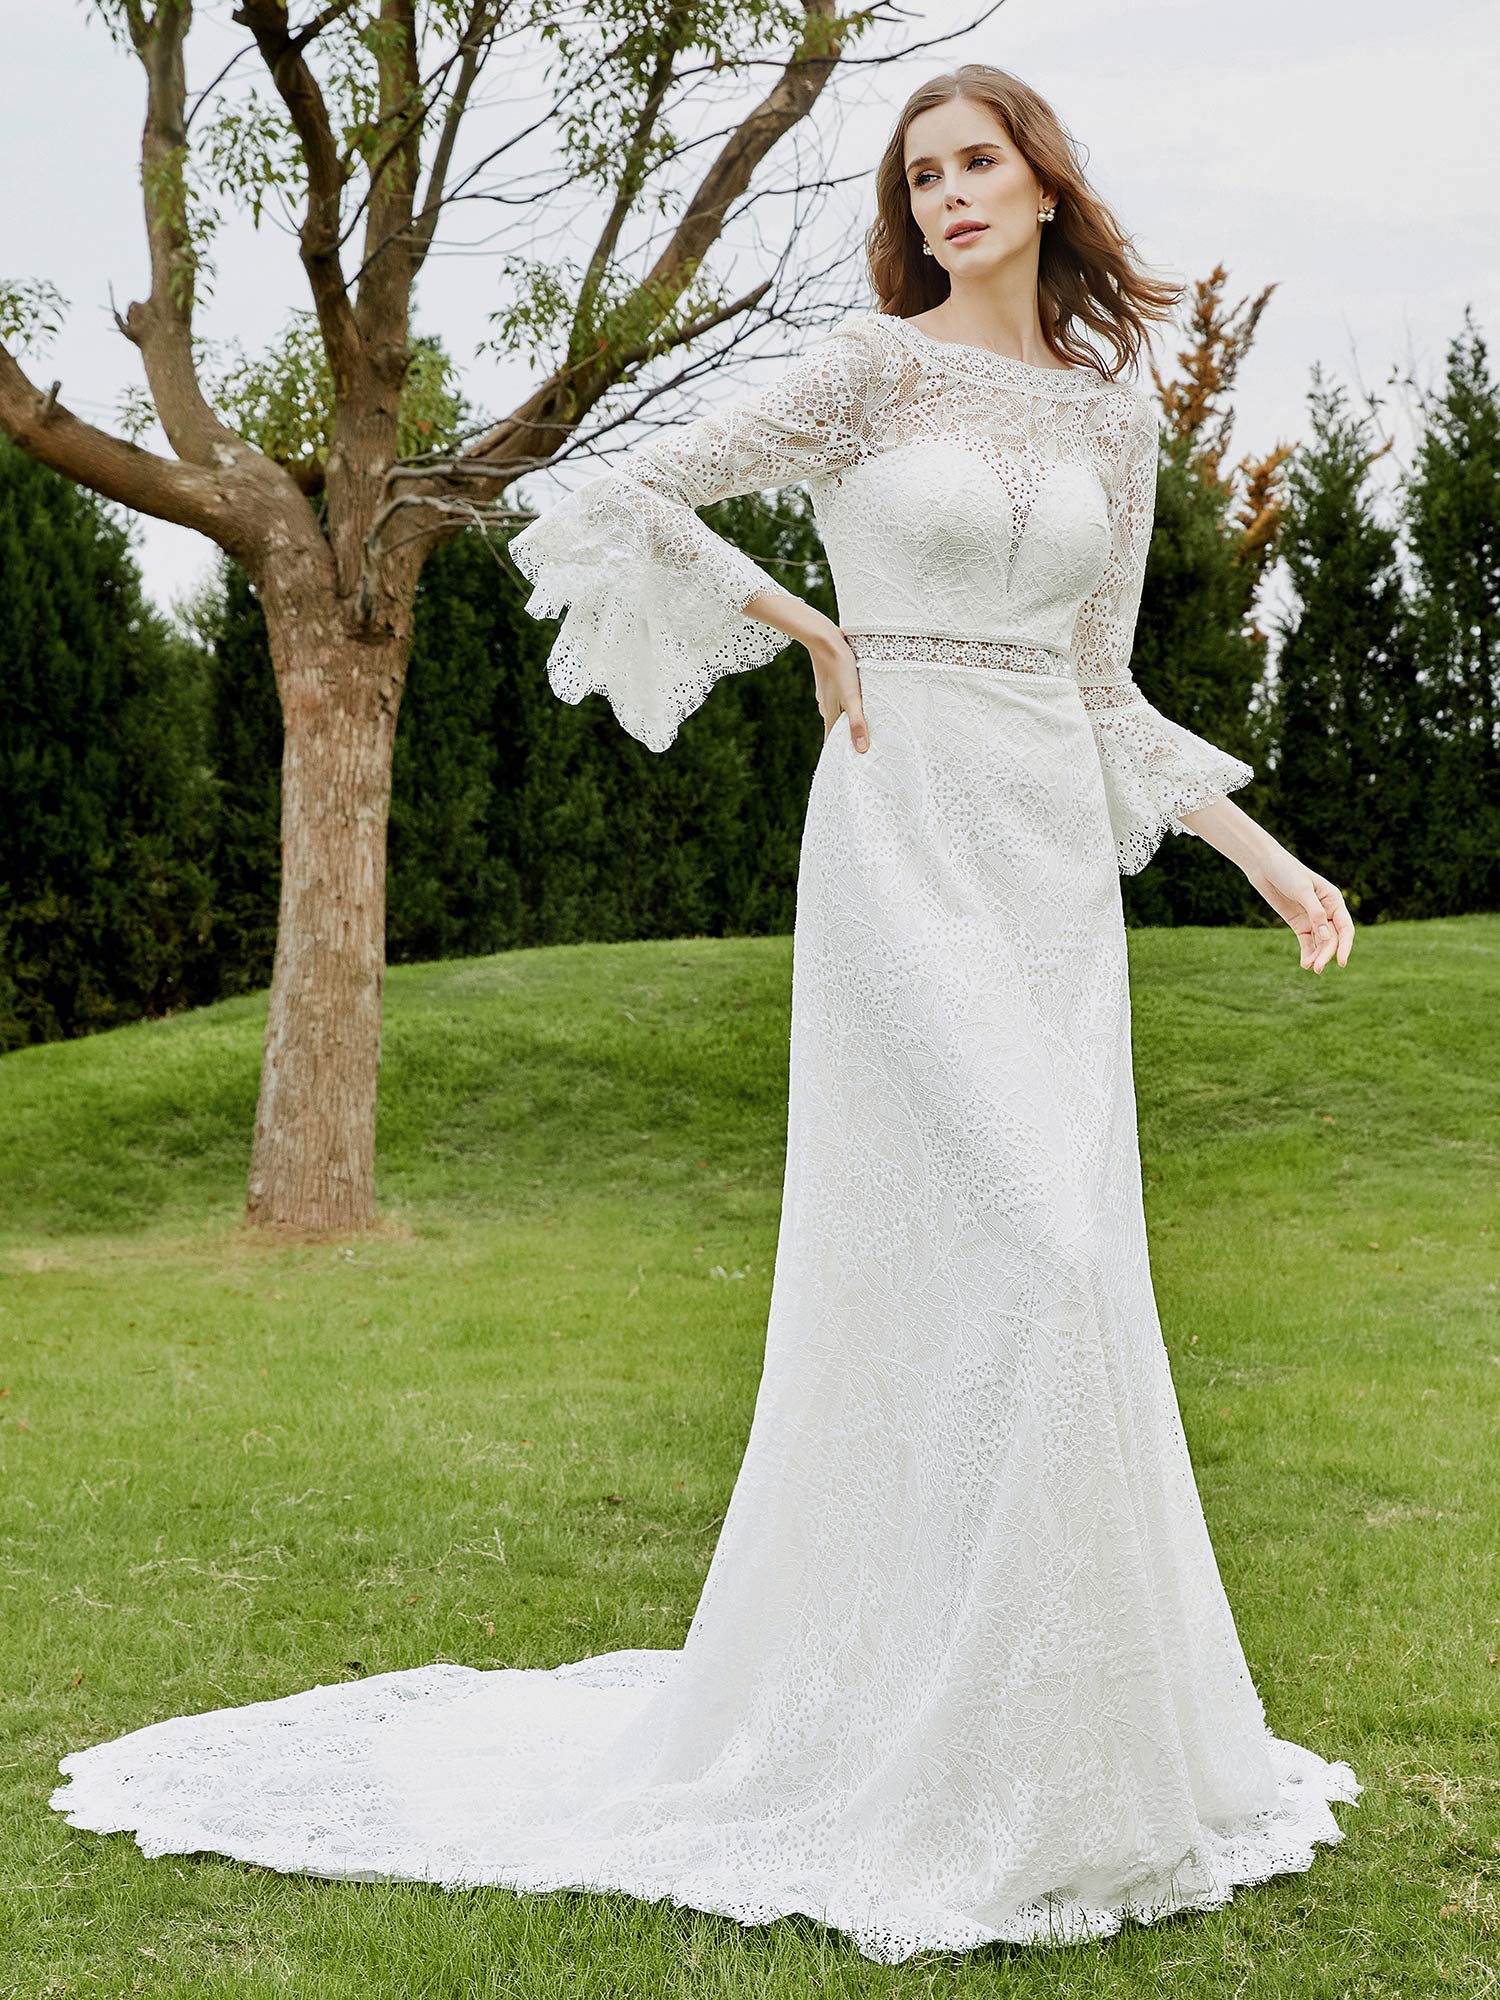 Illusion Neckline 3/4 Sleeves Lace A-line Wedding Dress-Champagne